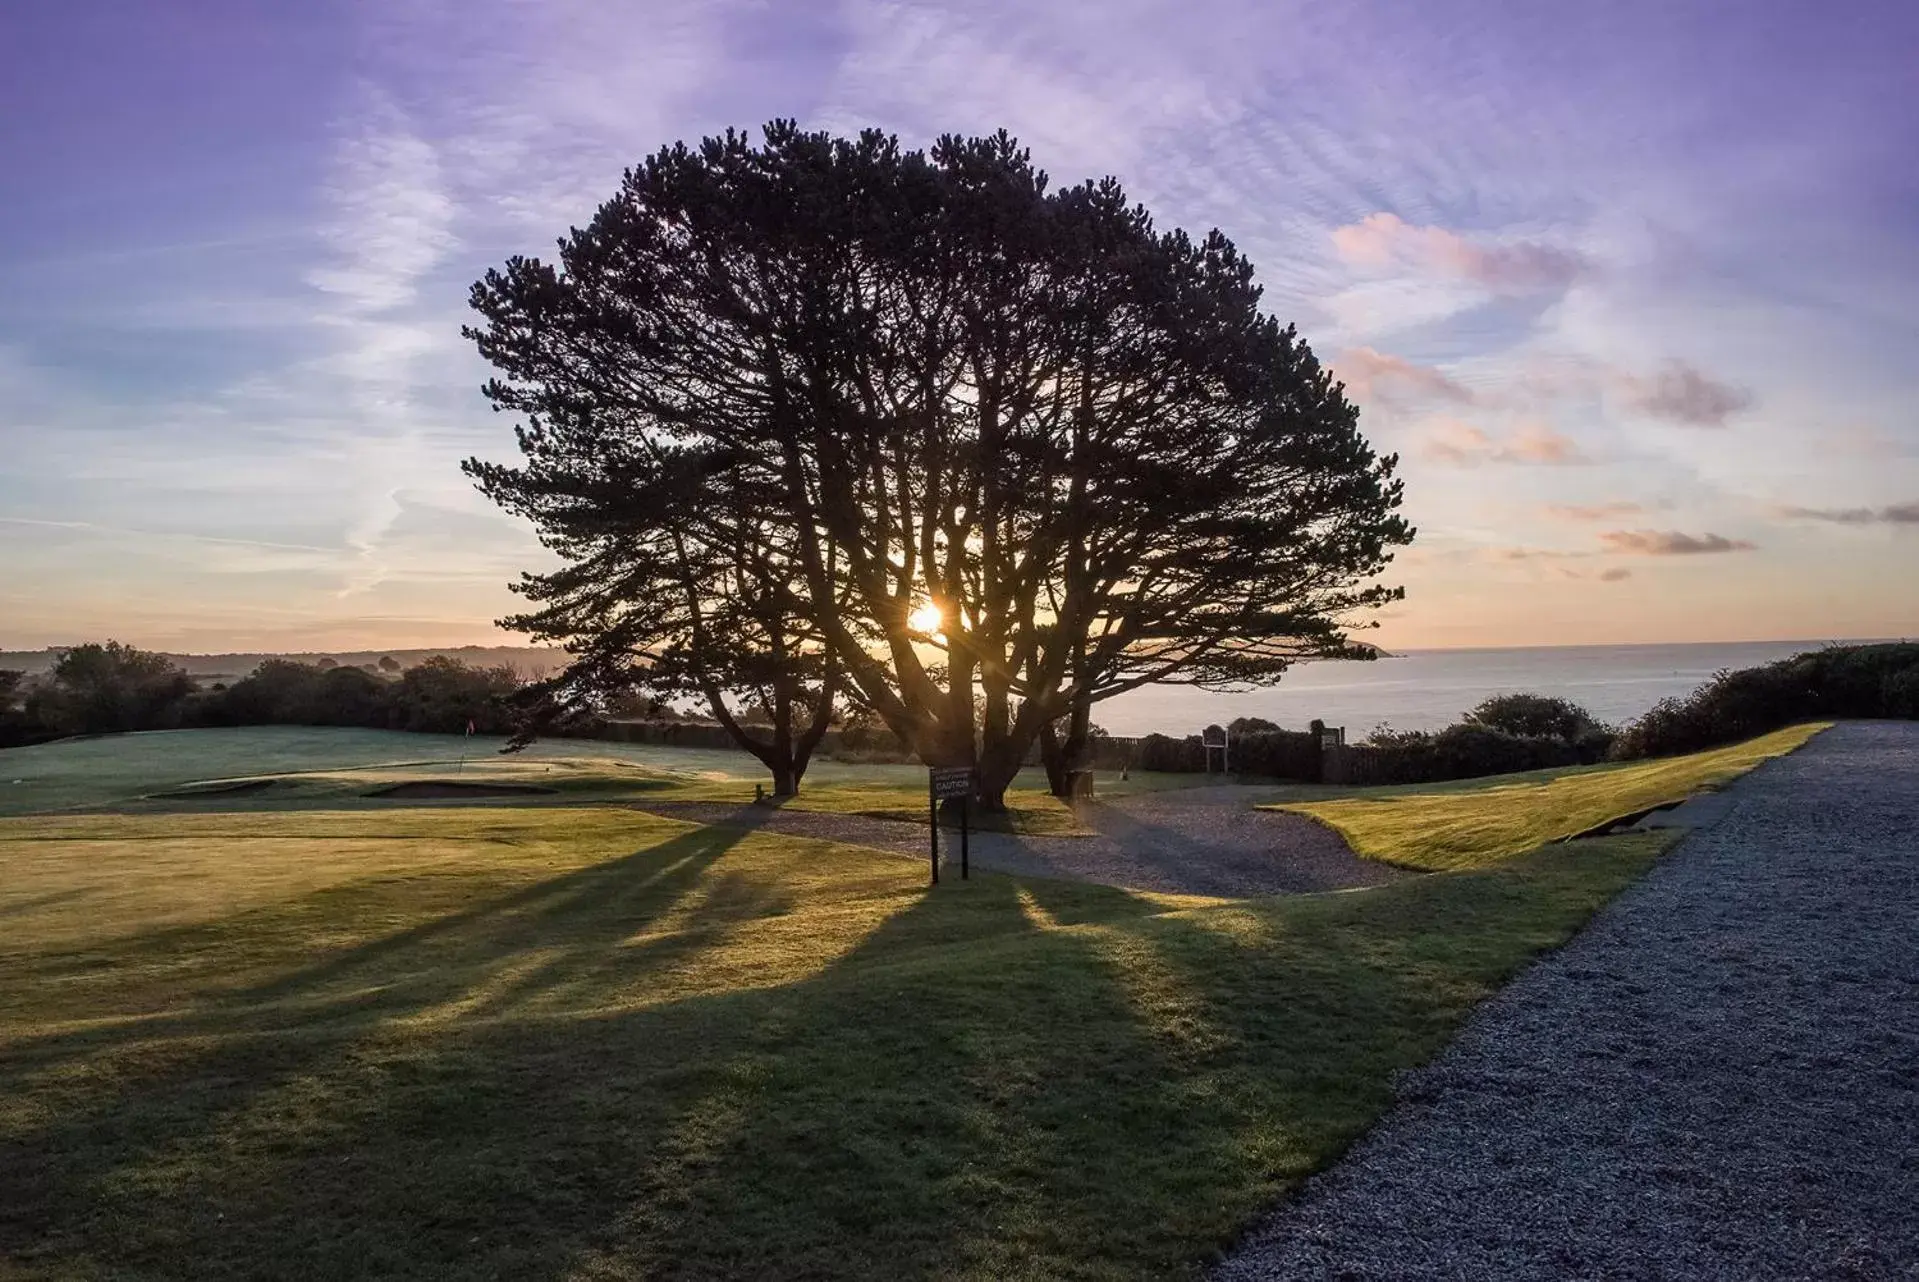 Property building, Sunrise/Sunset in The Carlyon Bay Hotel and Spa